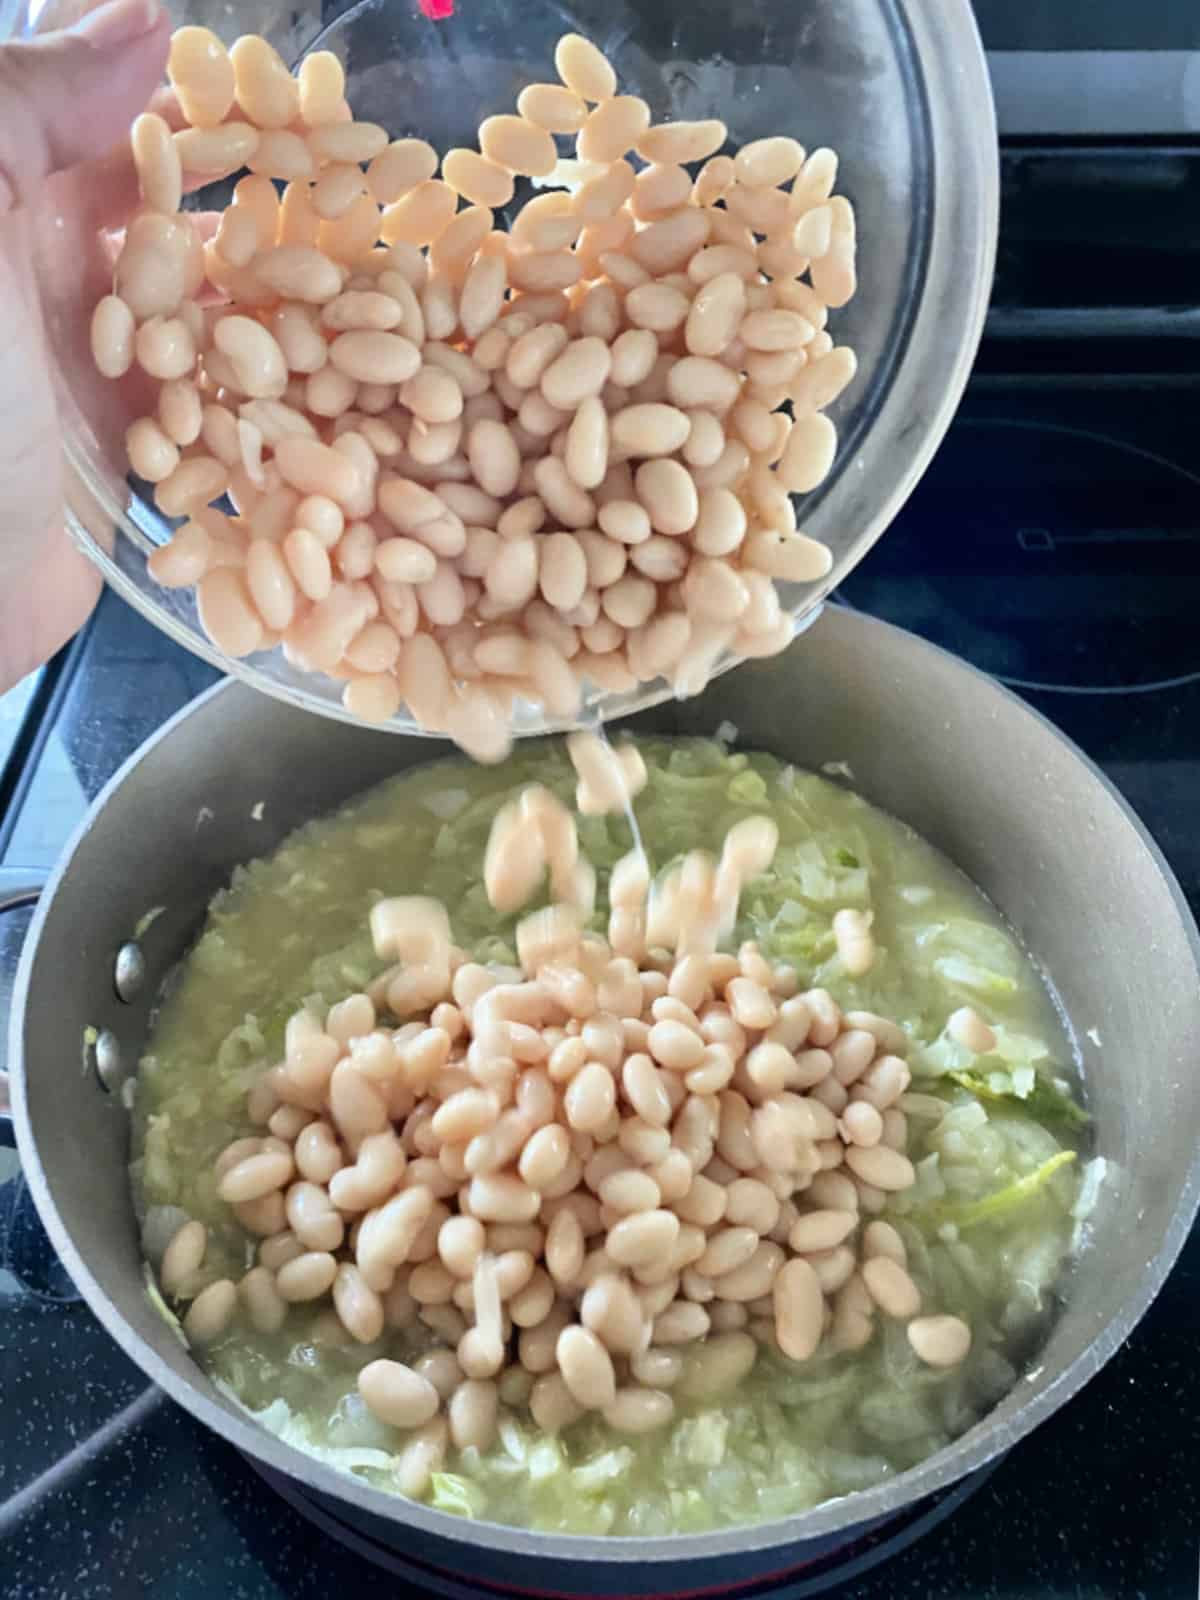 Hand pouring in white beans into a skillet on the stovetop.